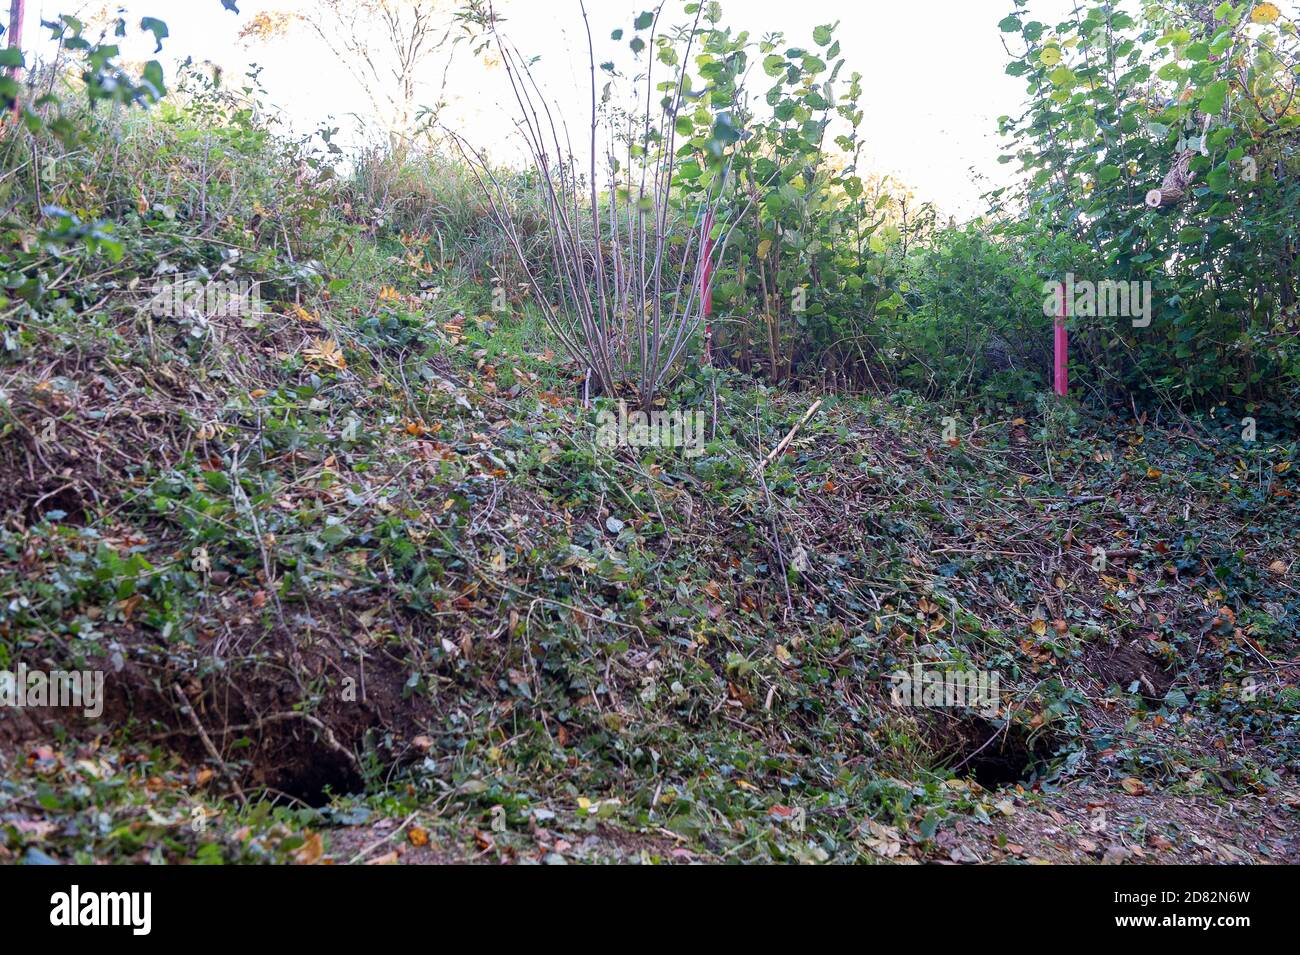 Wendover, Aylesbury Vale, UK. 26th October 2020. HS2 contractors were today strimming hedgerows but only around numerous entrances to badger setts on a public footpath and fields that adjoin land that HS2 have now compulsorily purchased on Durham Farm. Some of the entrances to the badger setts had previously been wired over. Grave concerns have been raised by anti HS2 environmental campaigners about the hugely detrimental impact that the construction of the HS2 High Speed Rail from London to Birmingham is having upon wildlife. Credit: Maureen McLean/Alamy Live News Stock Photo